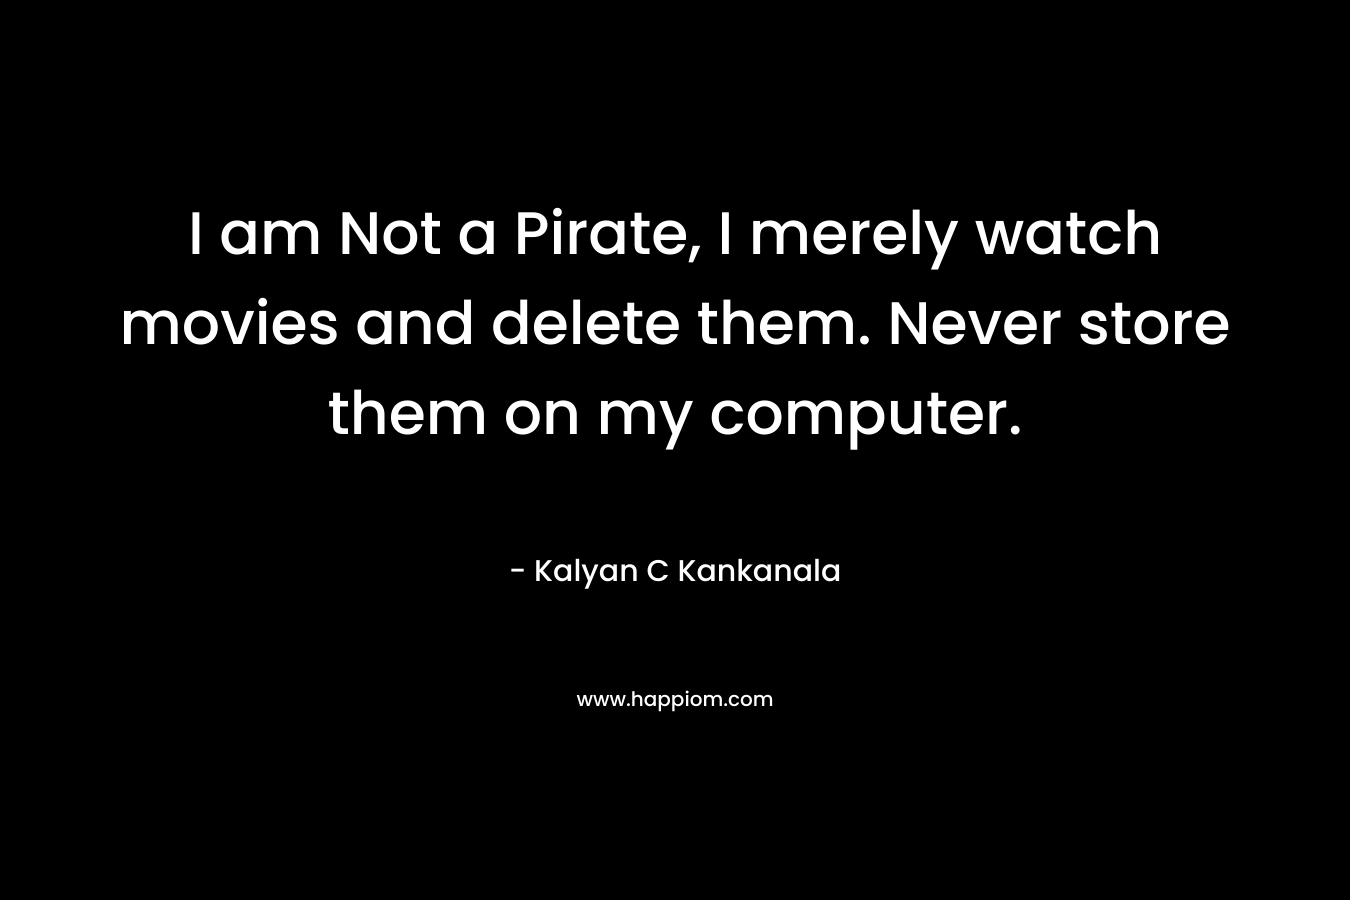 I am Not a Pirate, I merely watch movies and delete them. Never store them on my computer. – Kalyan C Kankanala